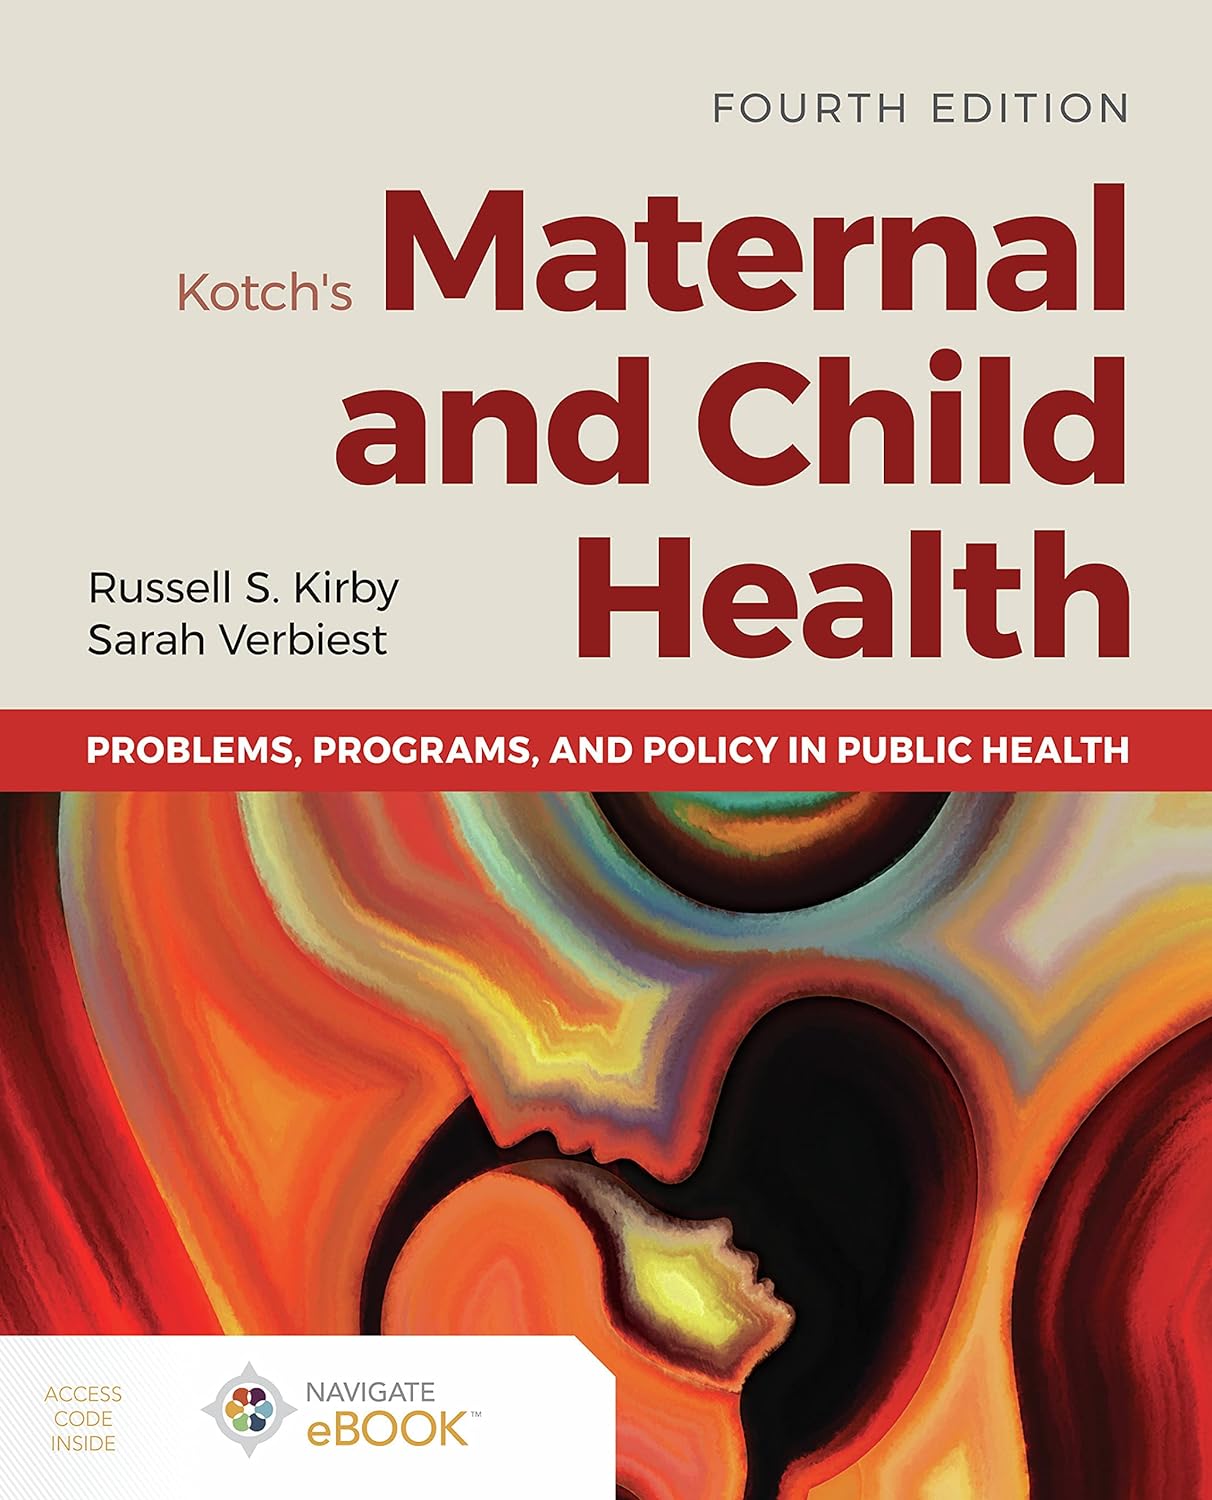 Kotch s Maternal and Child Health: Problems, Programs, and Policy in Public Health, 4th Edition by Russell S. Kirby 